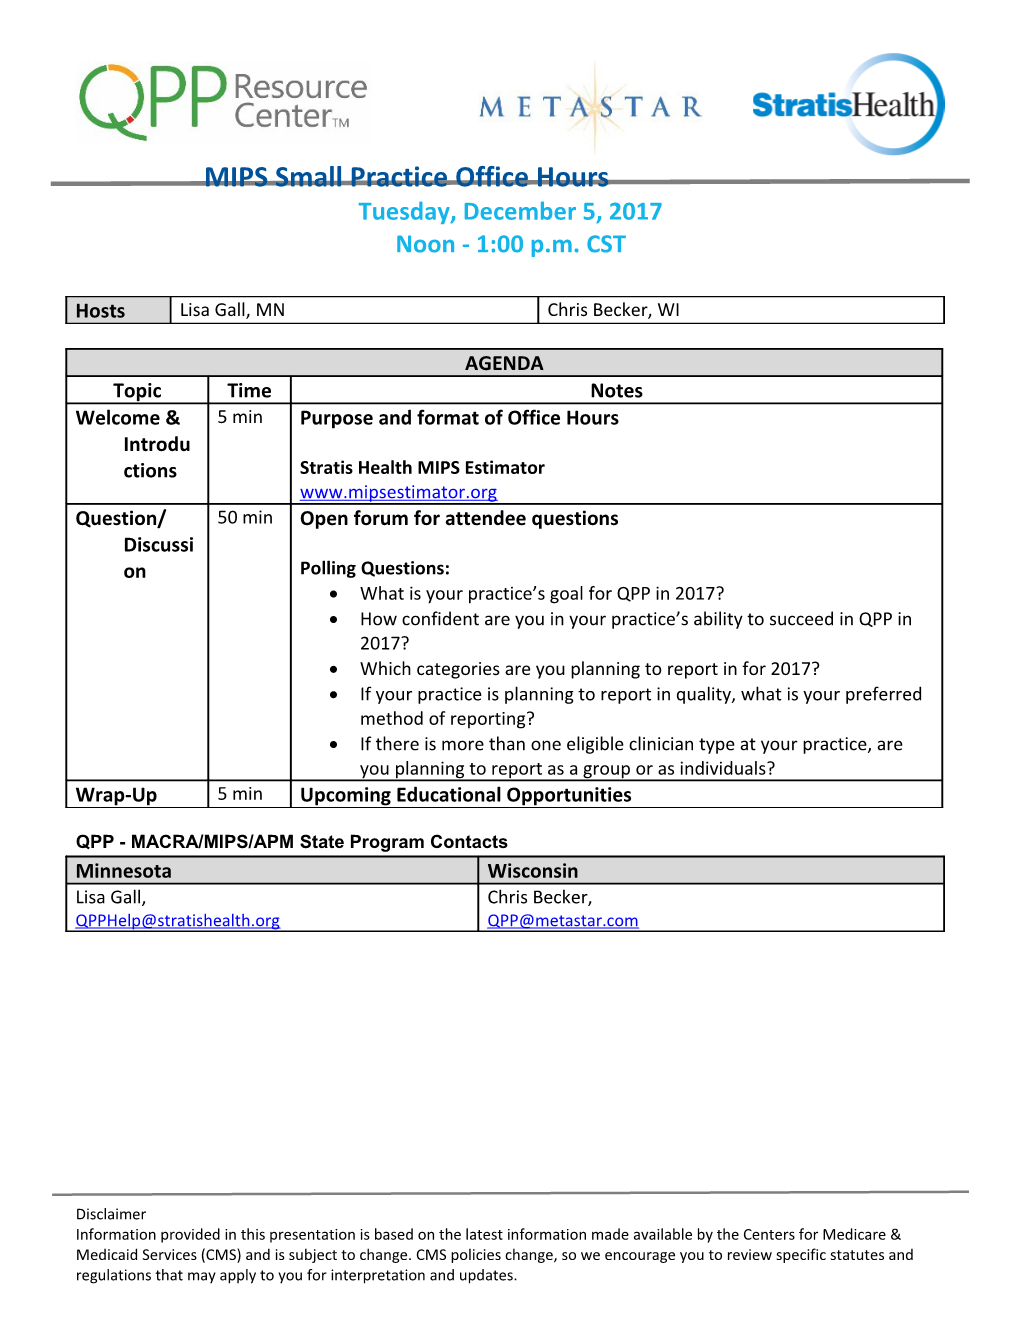 MIPS Small Practice Office Hours Agenda Template